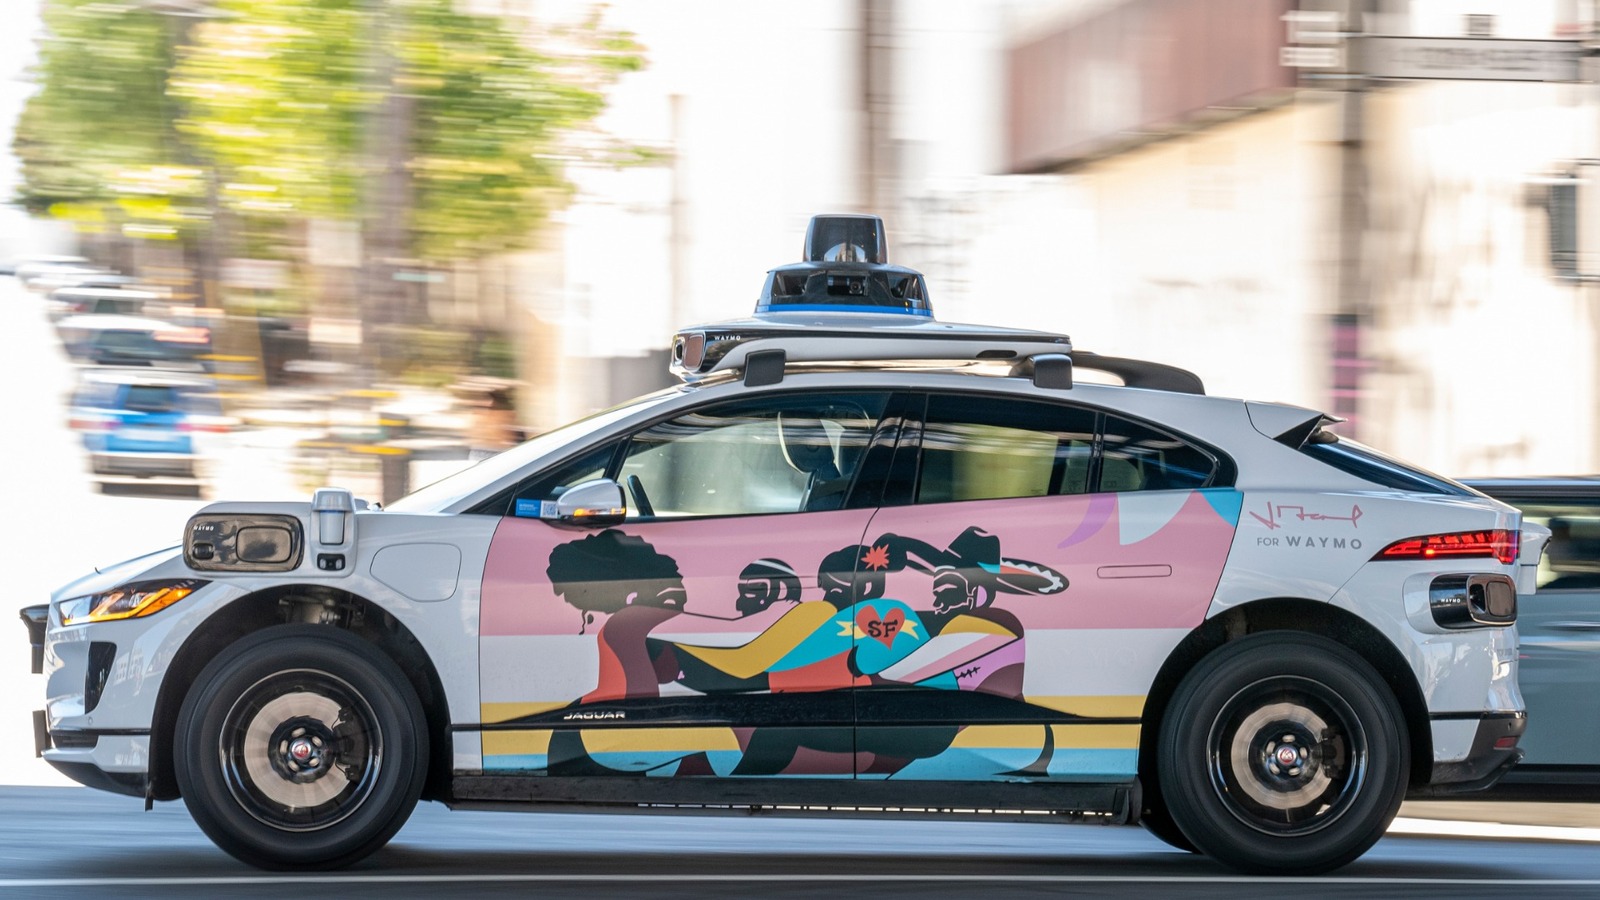 Can You Still Get A DUI Or DWI In A Self-Driving Car?